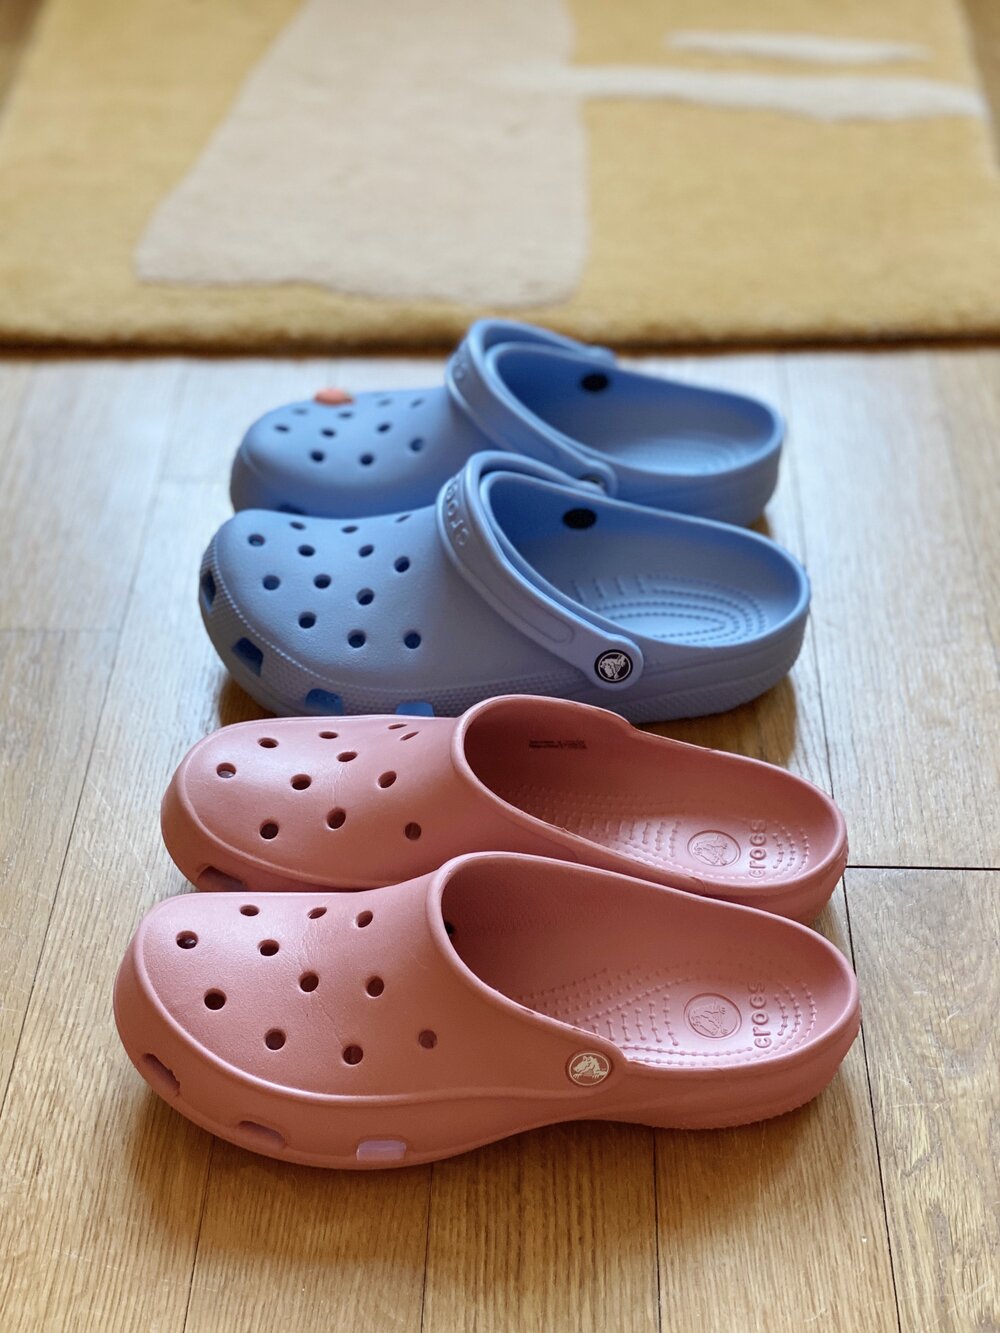 crocs with feet painted on them